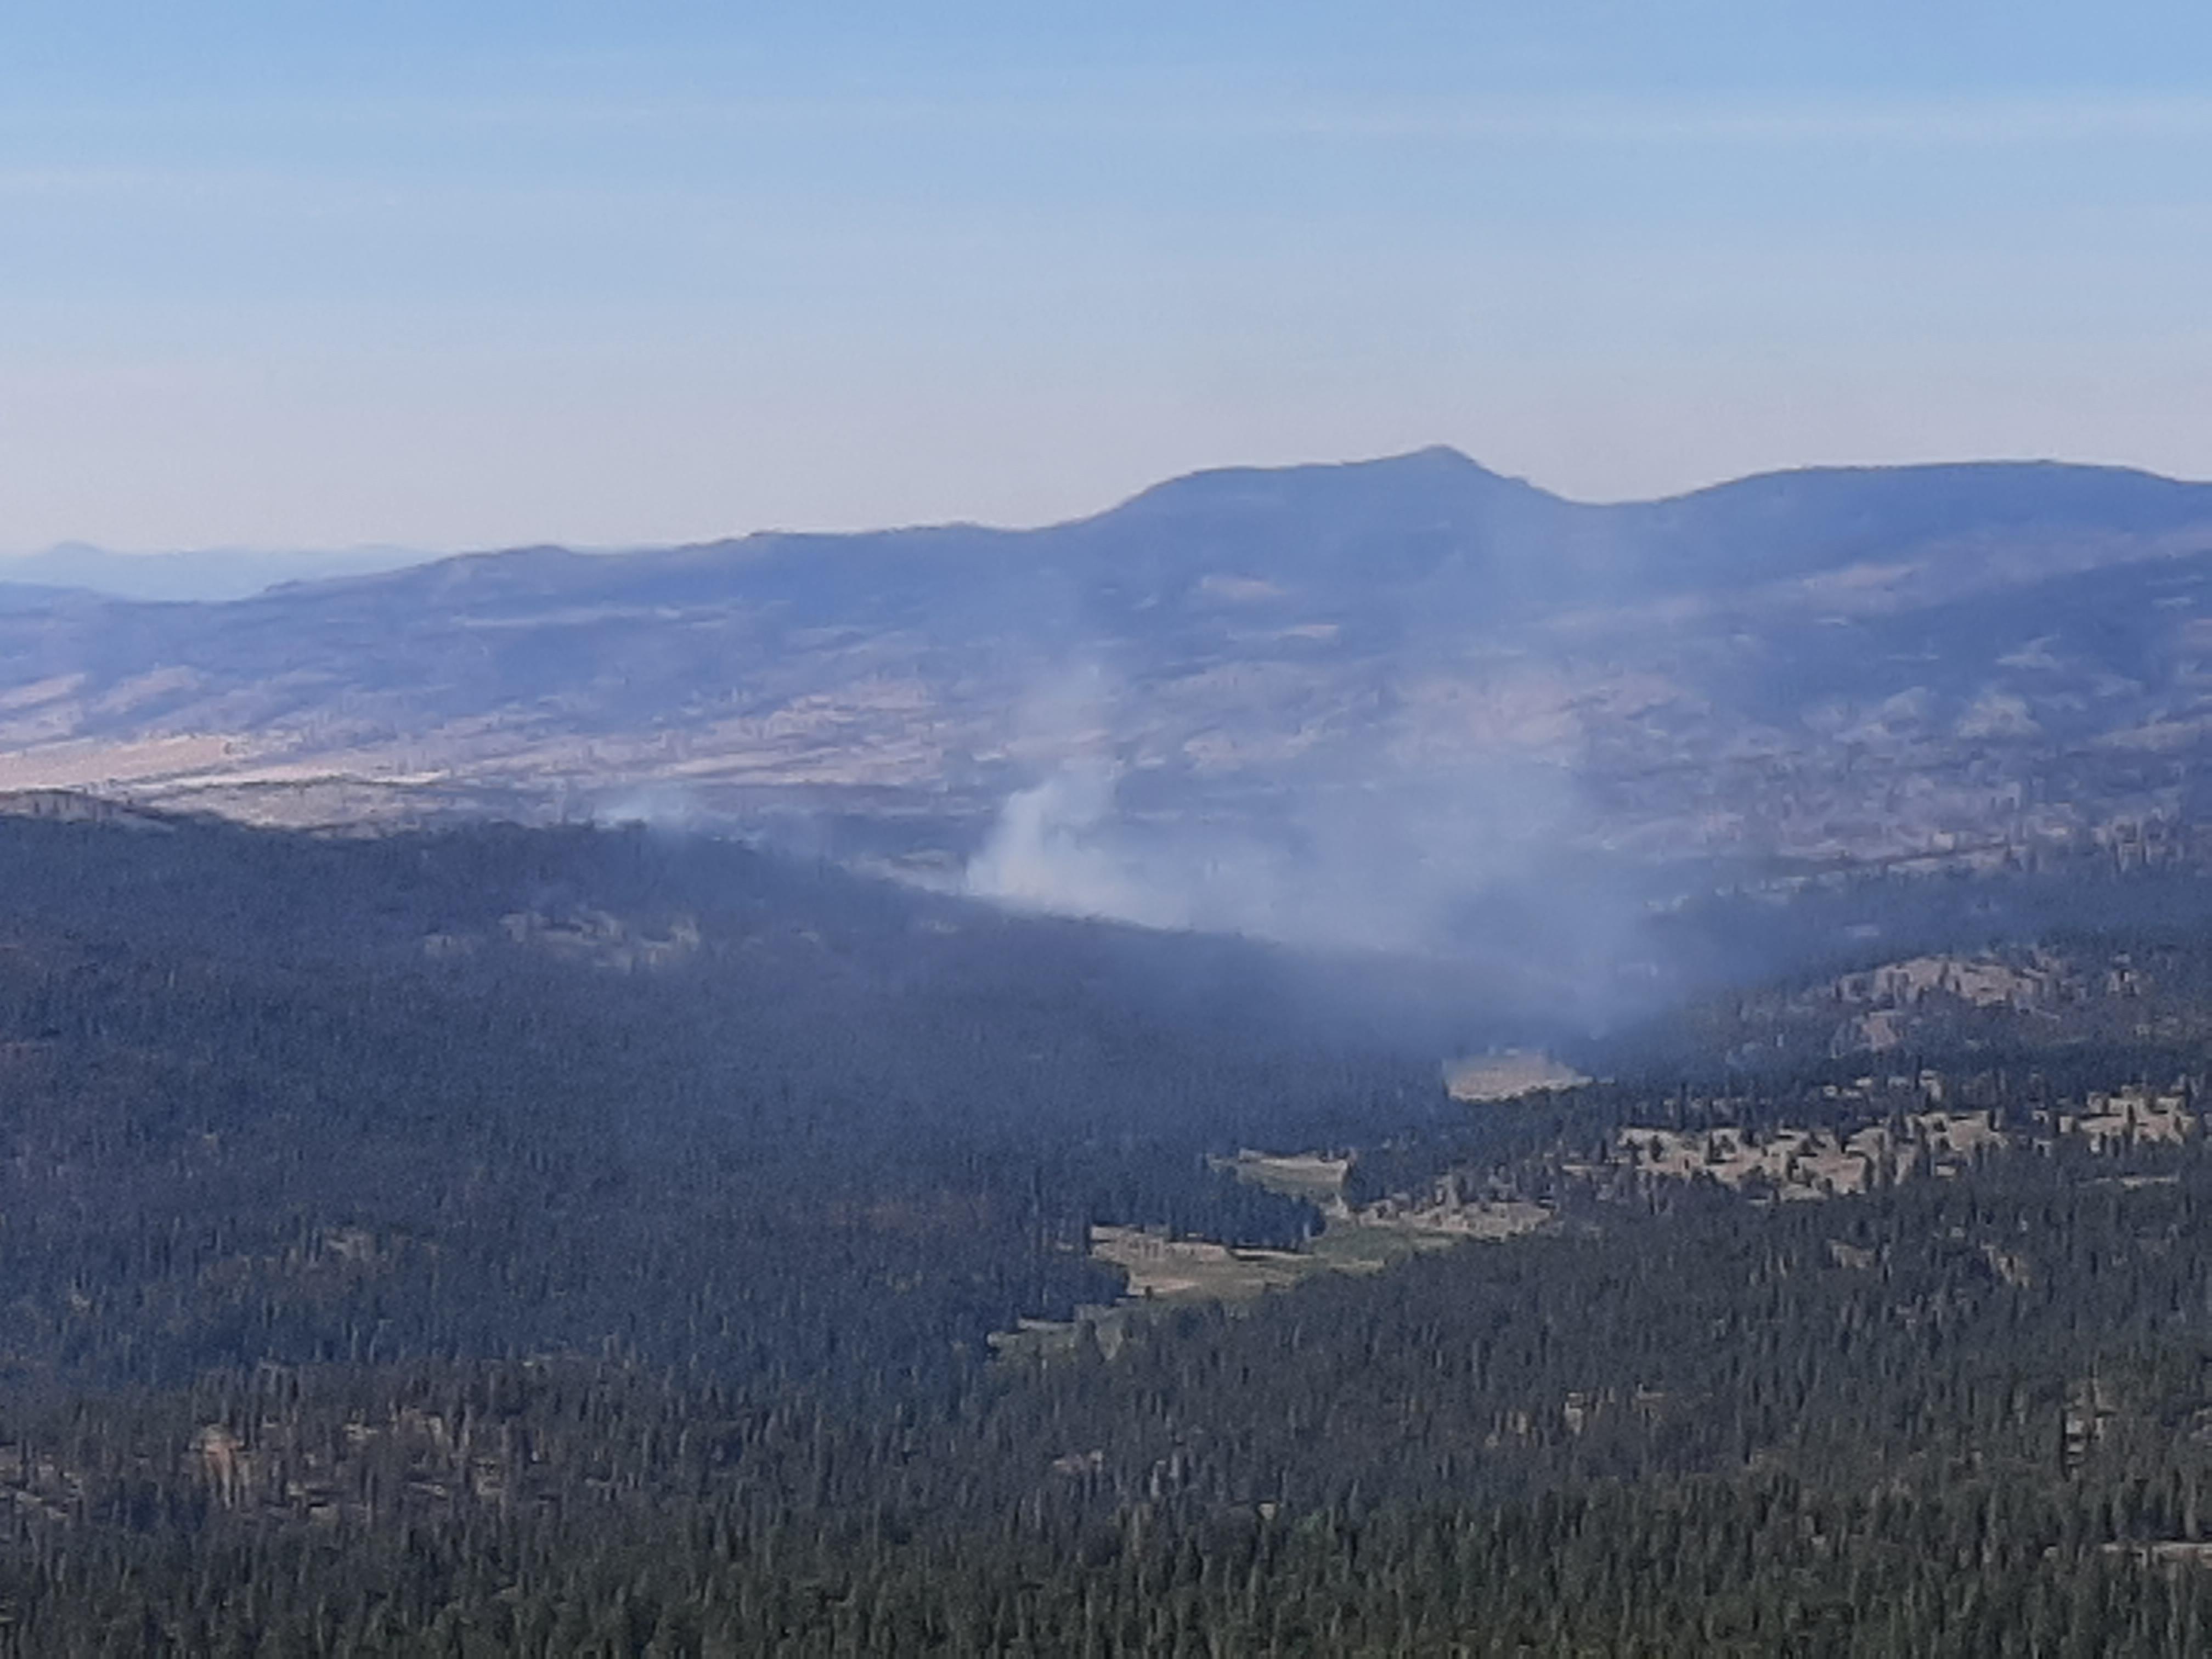 Image of smoke rising from the Murderers Creek 6 prescribed fire area.